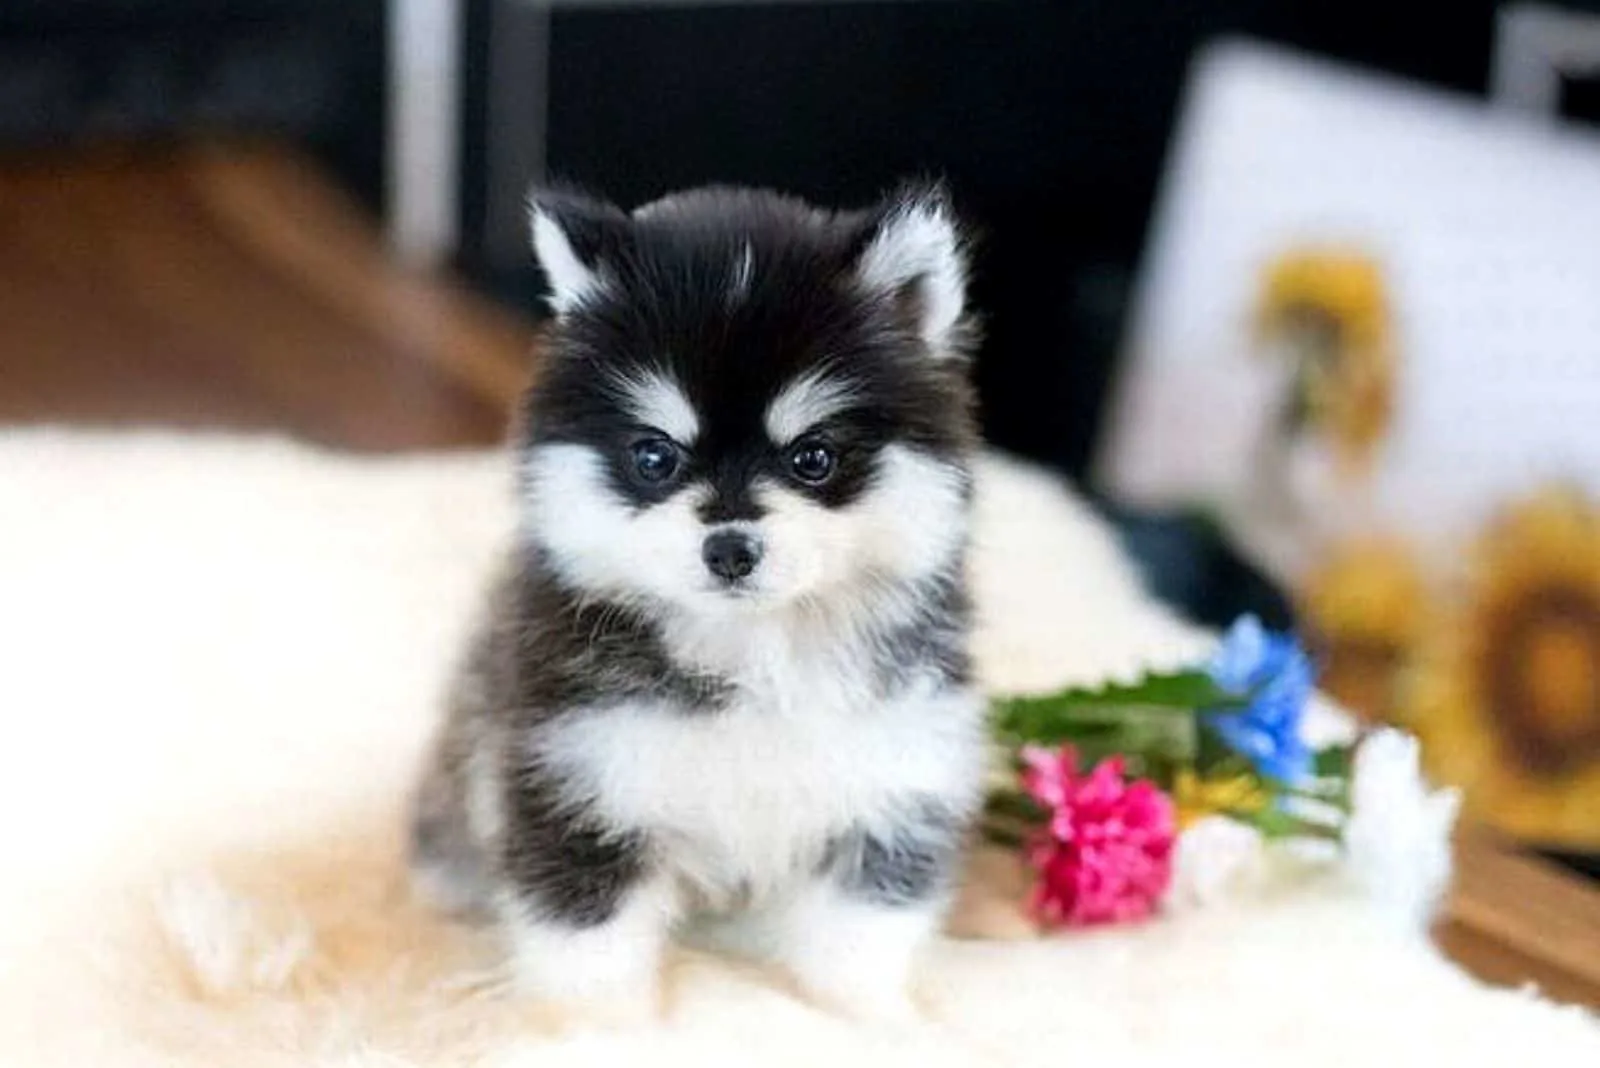 Teacup Pomsky puppy sitting at home on the table